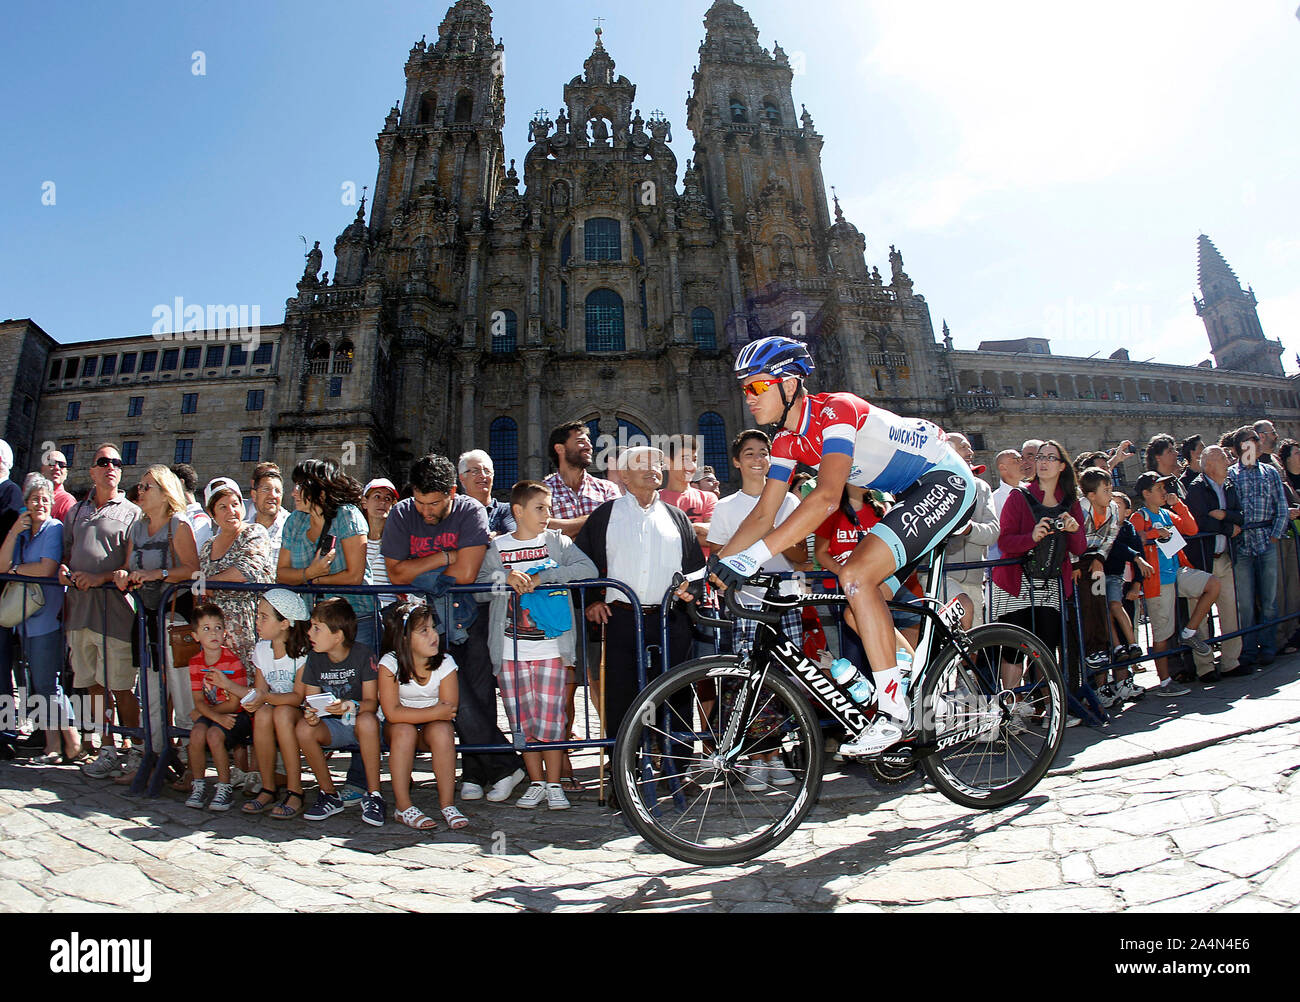 Niki Terpstra passes by the front of the Obradoiro of the Cathedral of Santiago de Compostela before the stage of La Vuelta 2012 between Santiago de C Stock Photo